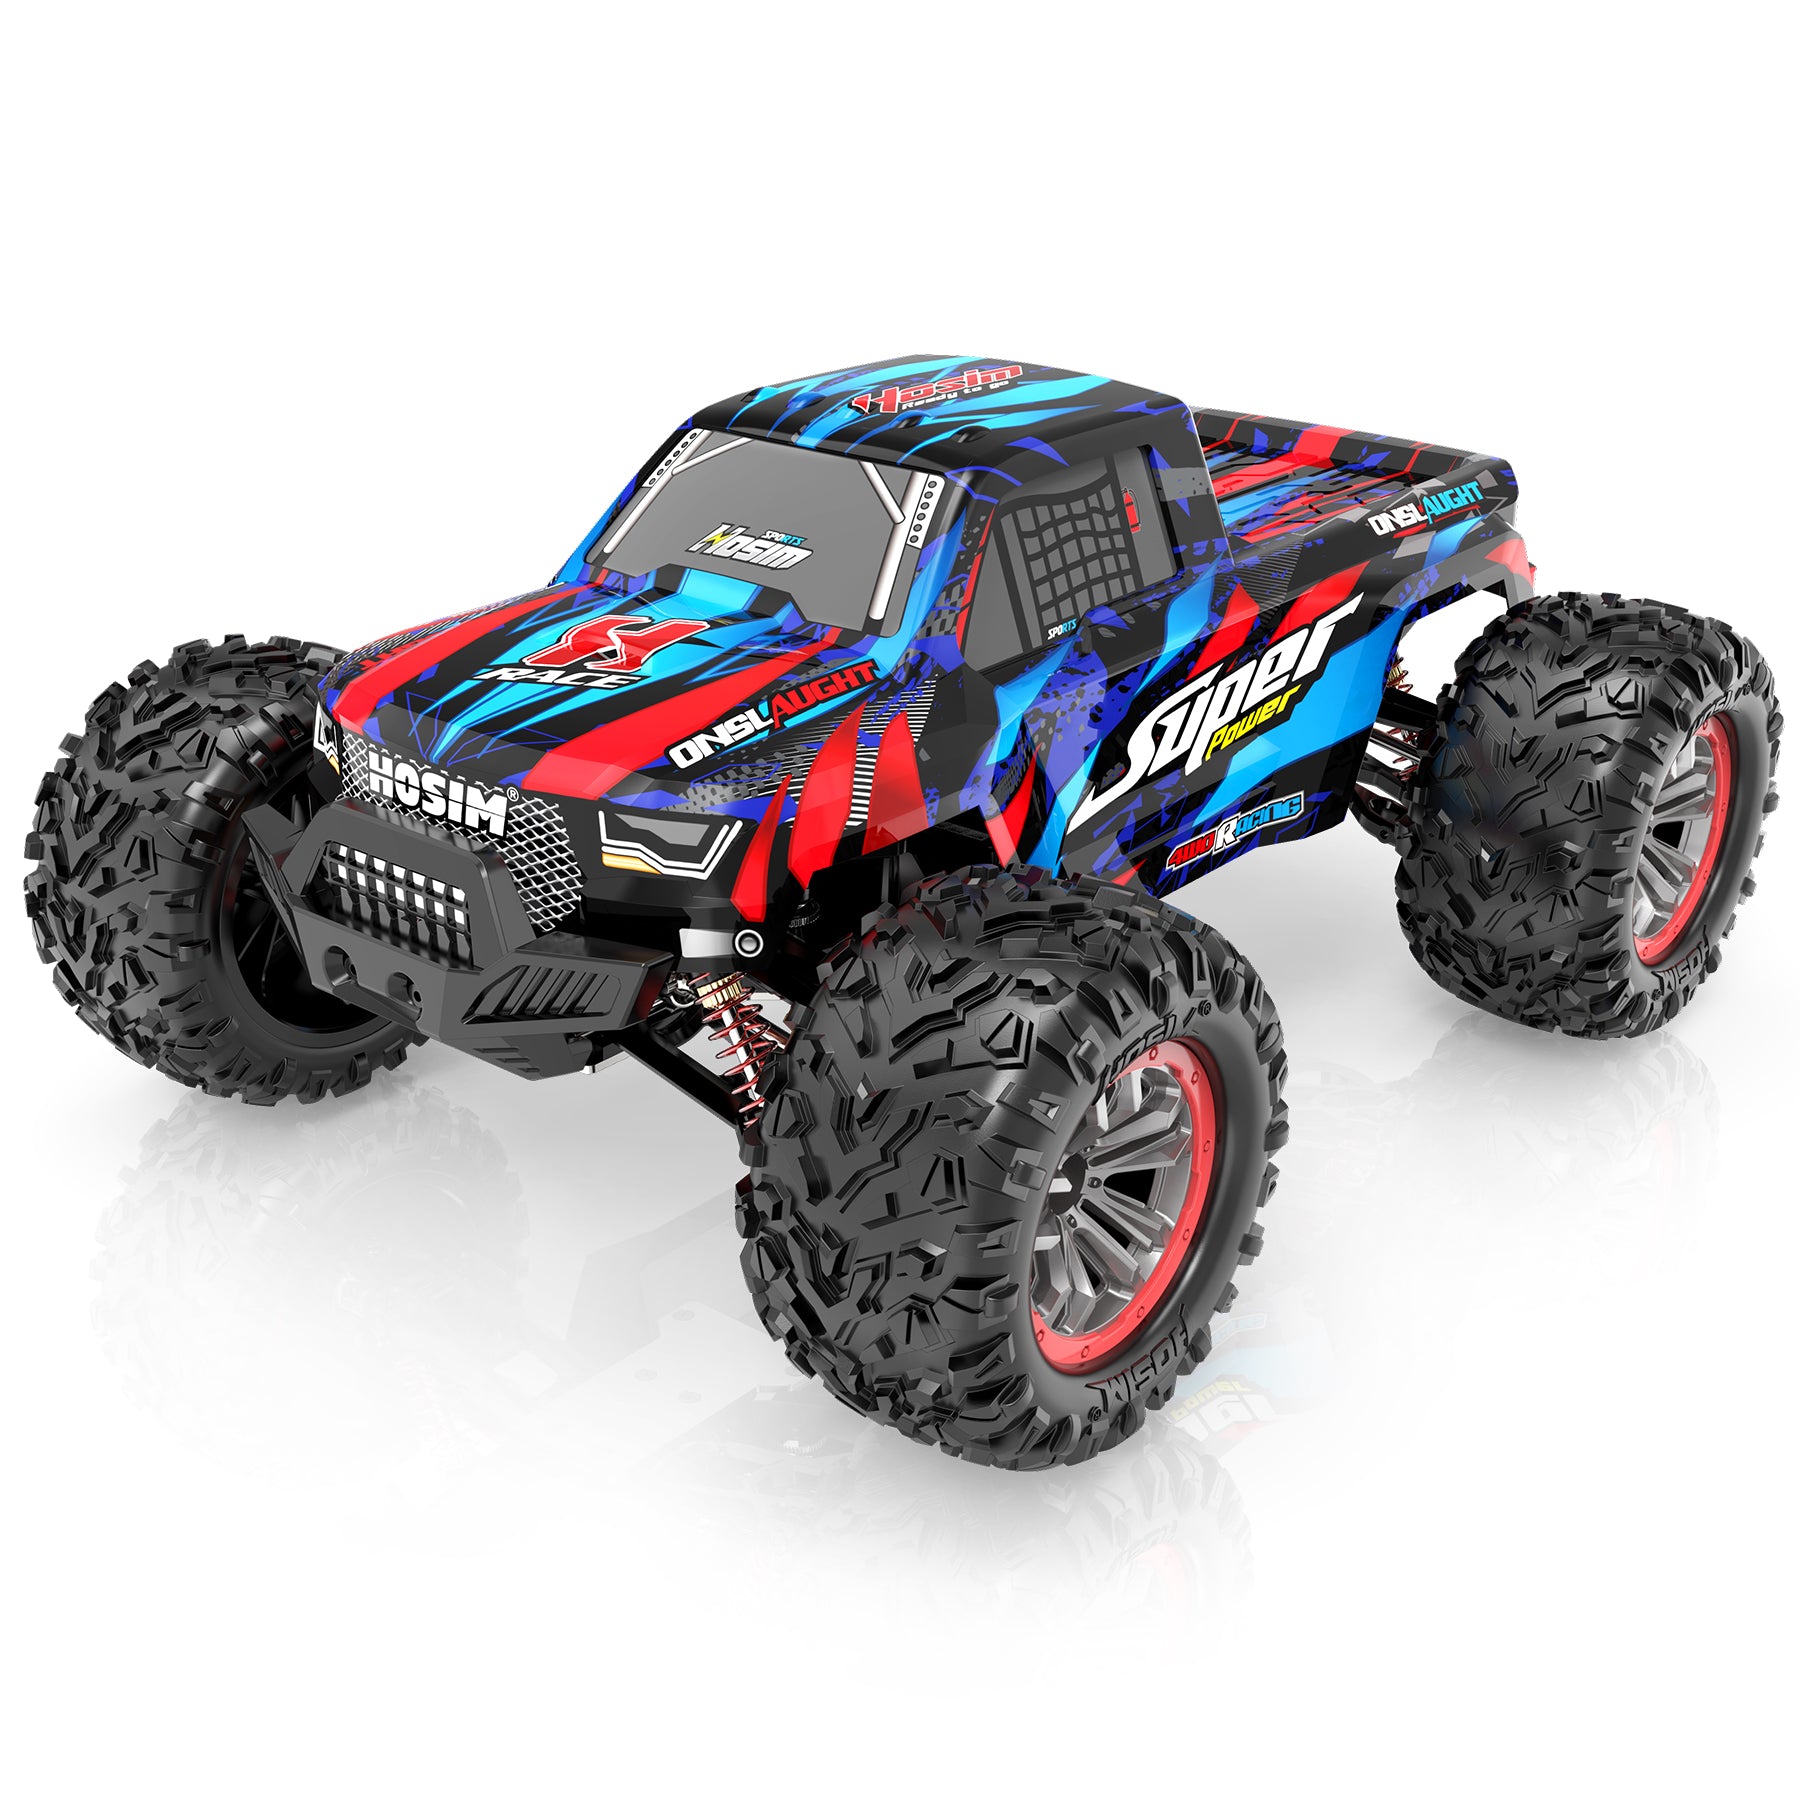 Hosim 1:10 RC Cars Brushless Remote Control Car High Speed 68+KM X-08 4WD Off Road RC Monster Trucks